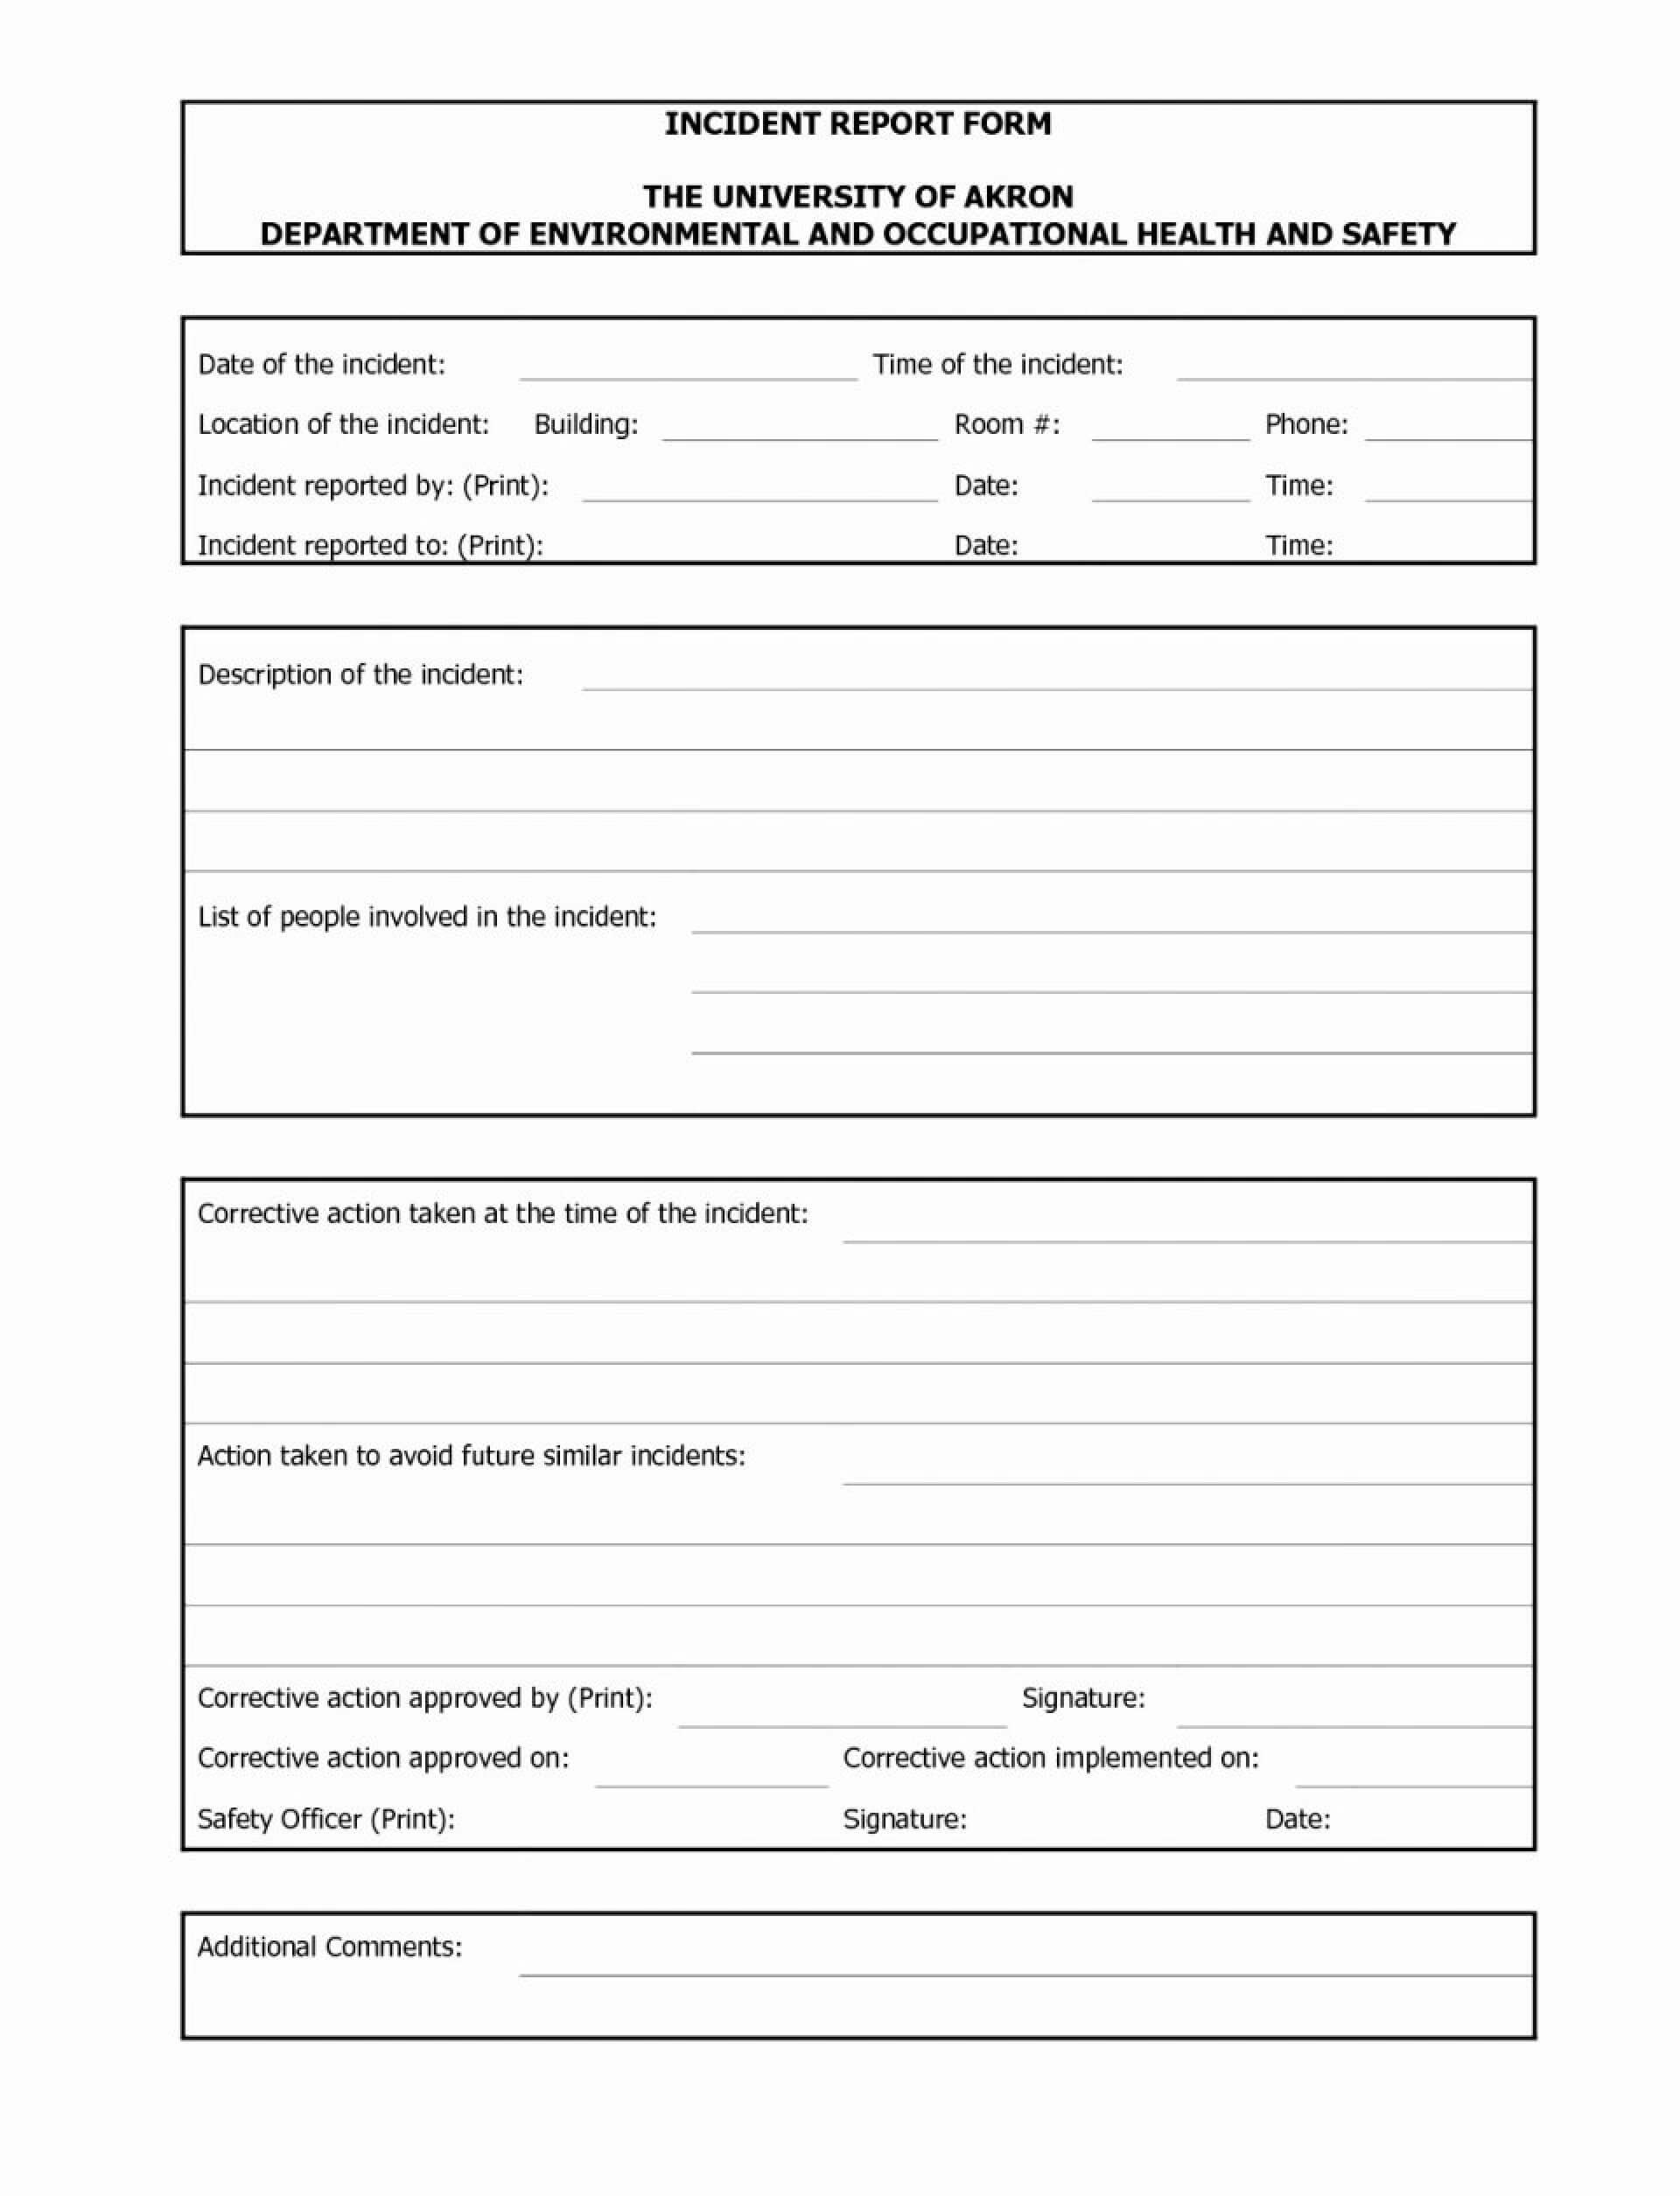 028 Incident Report Form Word Format Vehicle Accident Throughout Health And Safety Incident Report Form Template